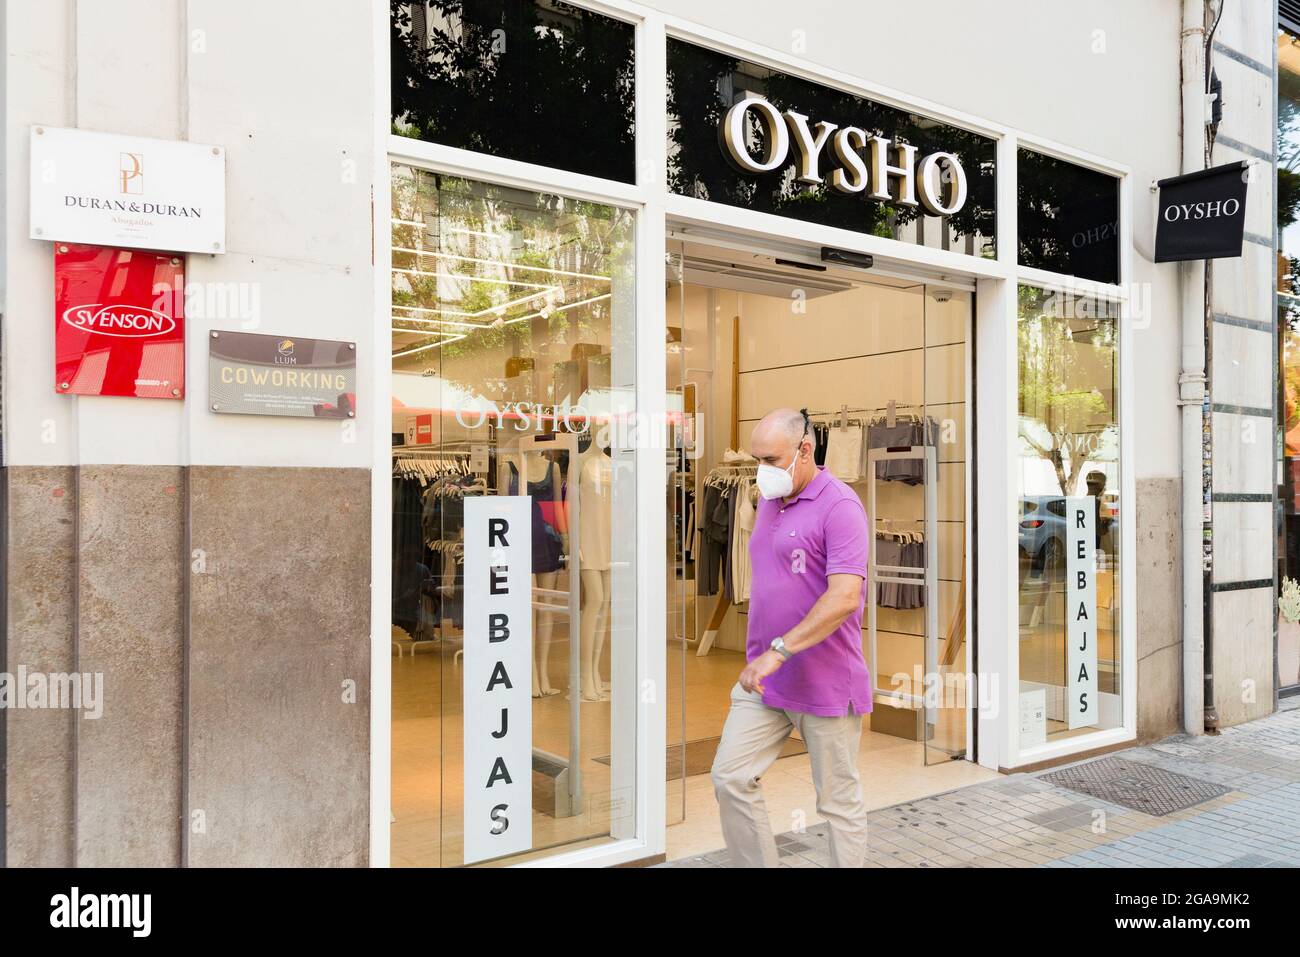 OYSHO: Online Fashion Store on the App Store